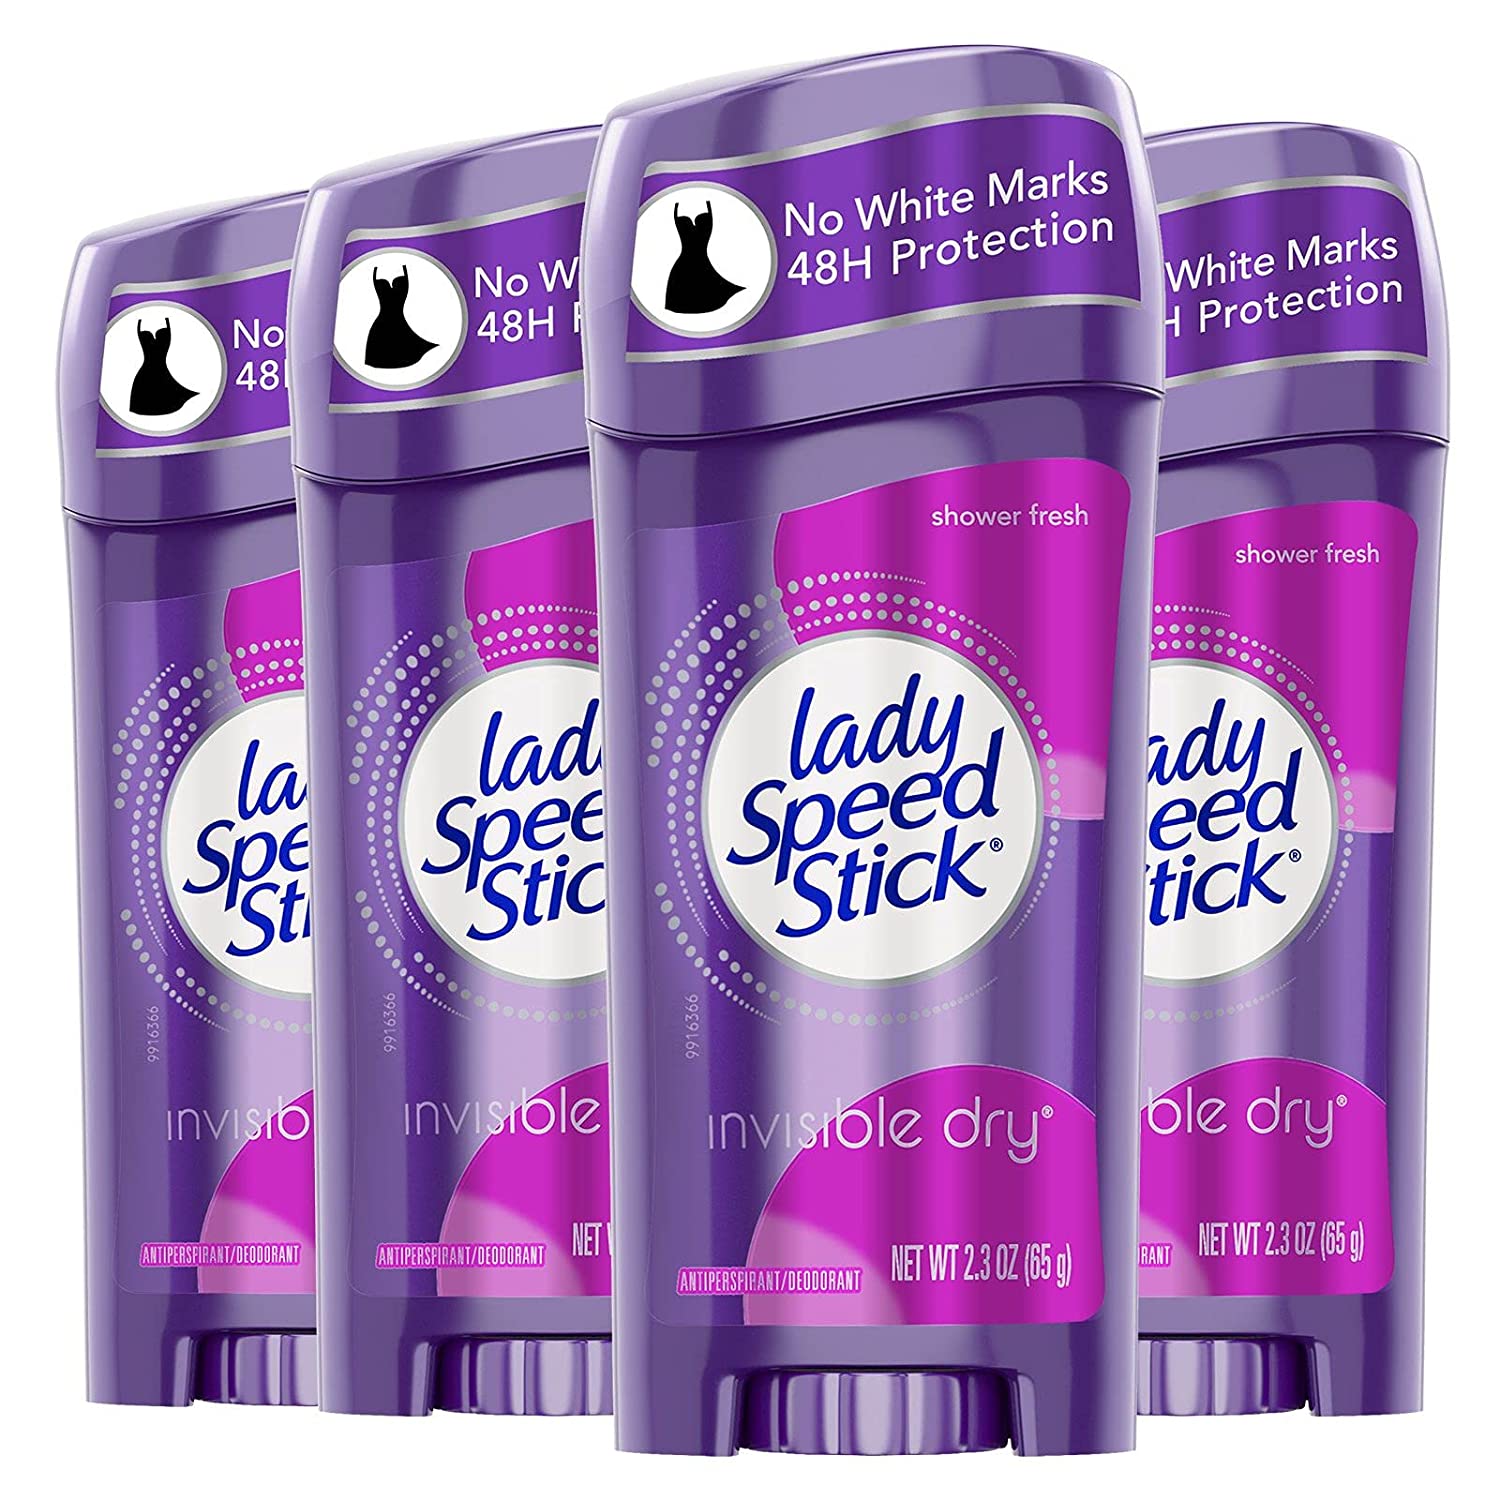 4-Pack 2.3-Oz Lady Speed Stick Invisible Dry Antiperspirant Deodorant (Shower Fresh) $6.12 w/ S&S + Free Shipping w/ Prime or on orders over $25